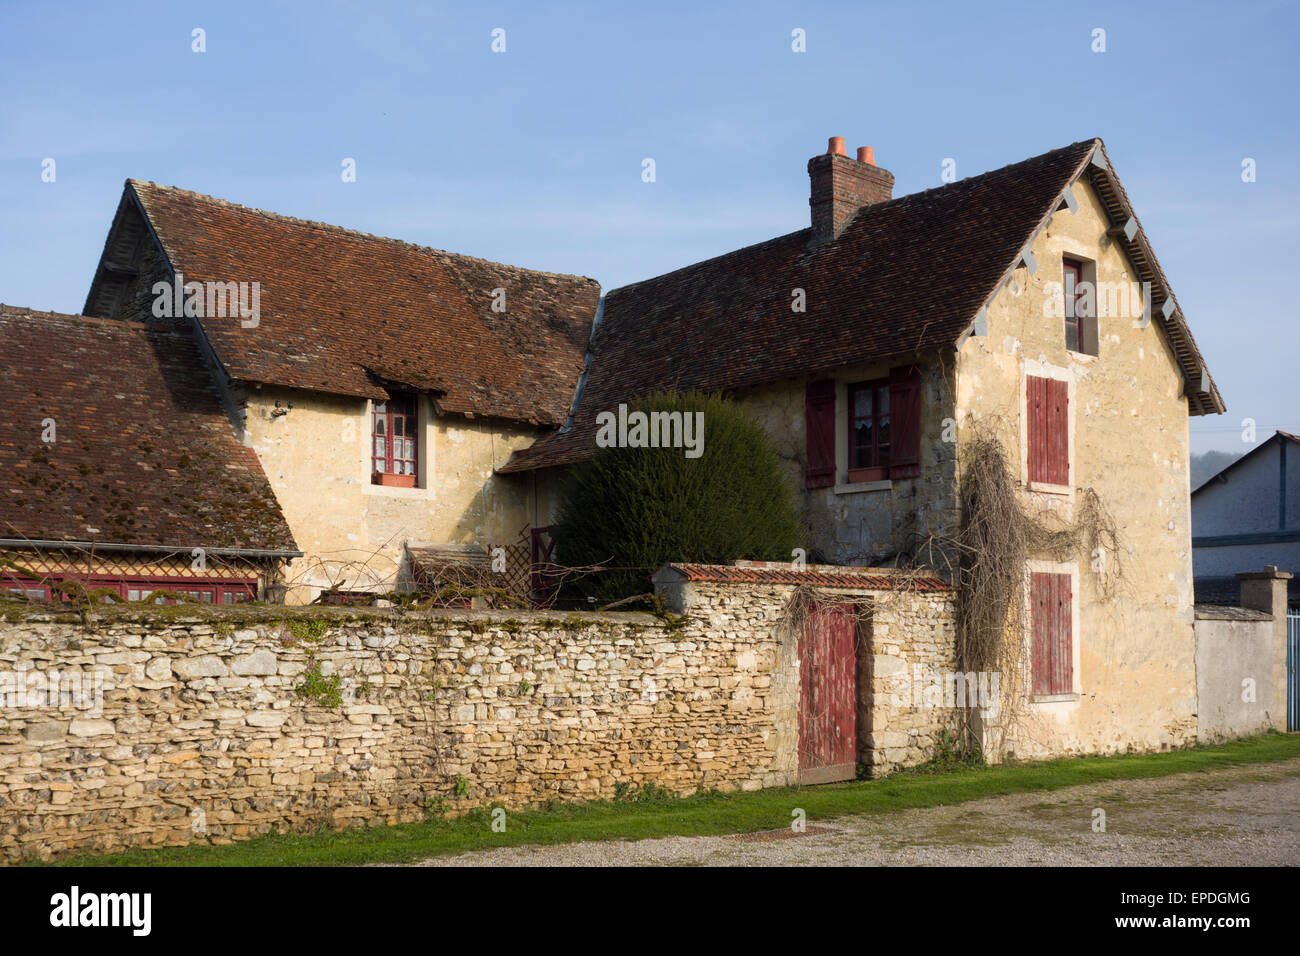 House at Fourges, Upper Normandy France Stock Photo